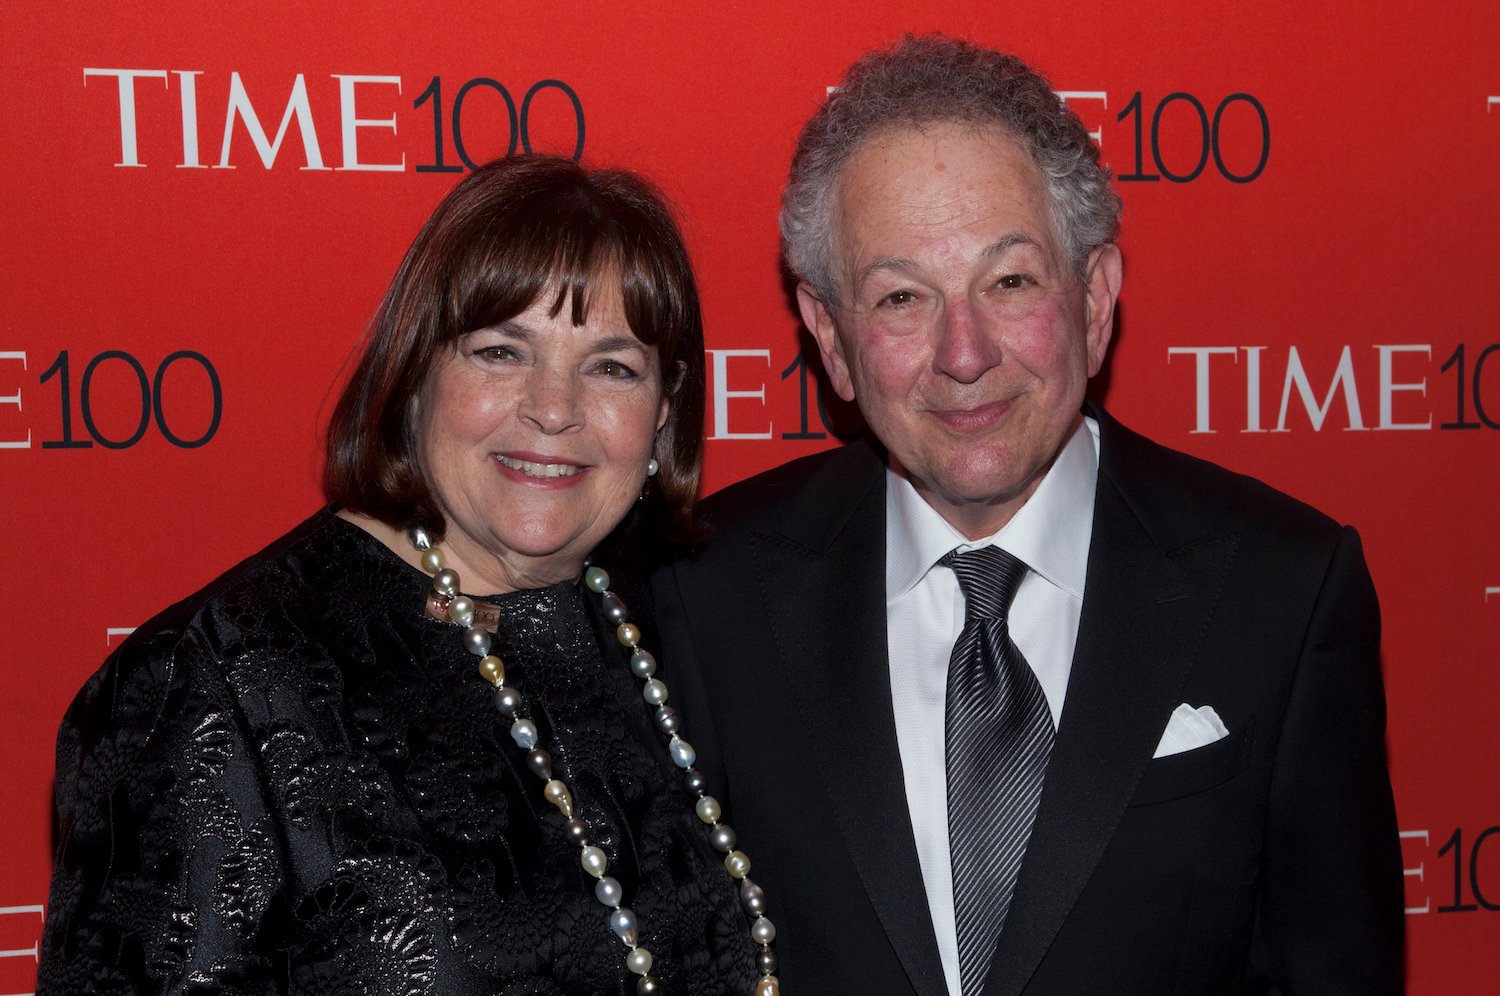 Ina Garten and Jeffrey Garten attend the 'TIME 100 Gala, TIME's 100 Most Influential People In The World'